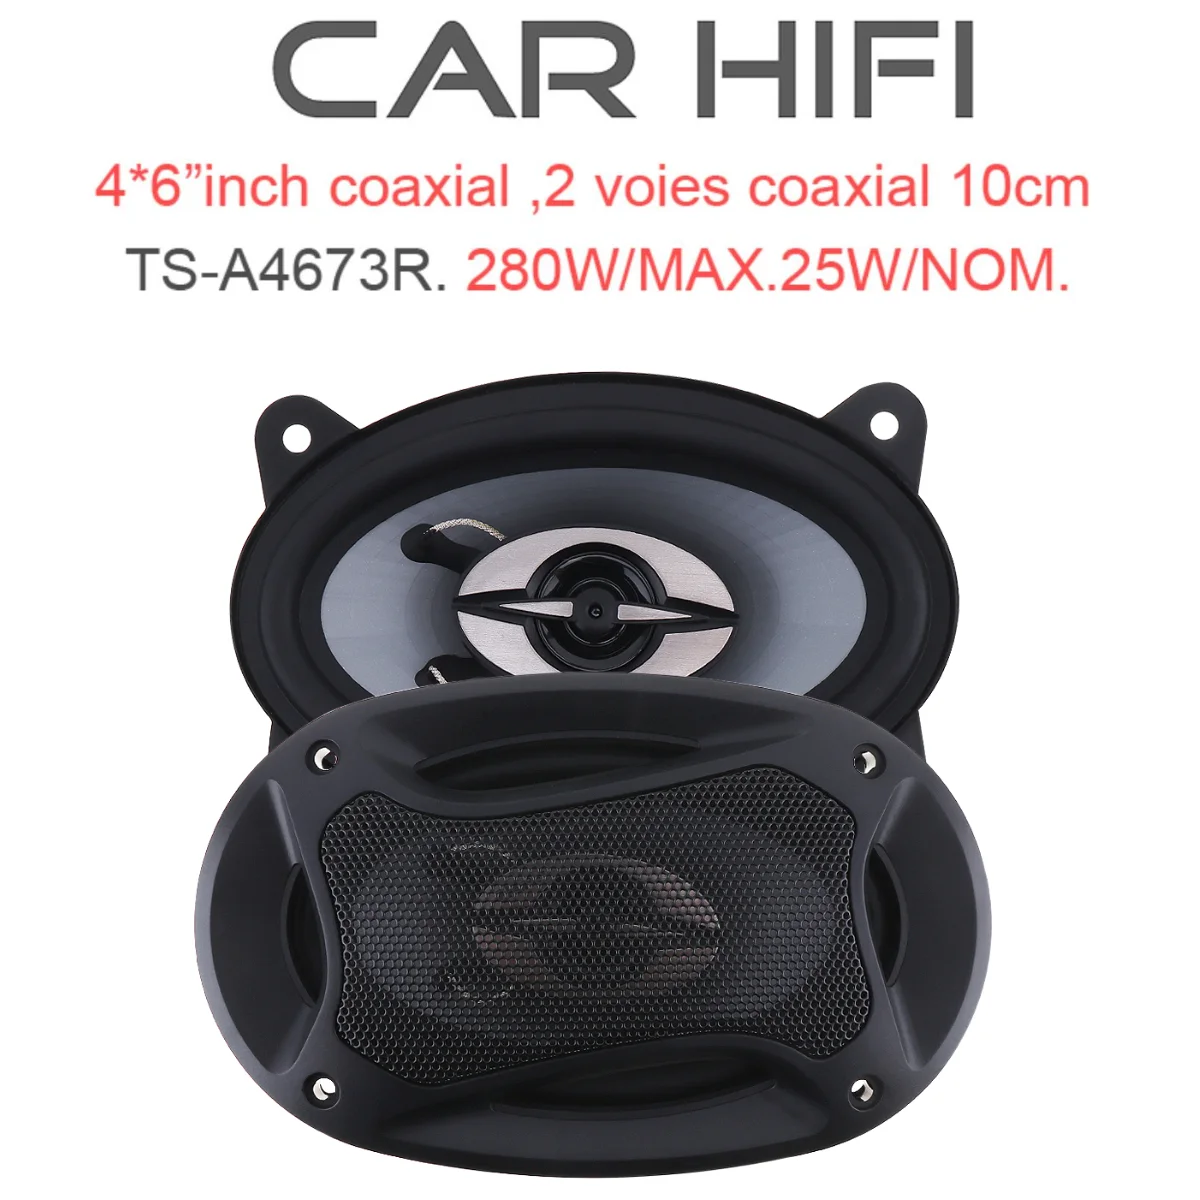 2pcs/set 4 x 6 Inch 280W Car Speaker TS-A4673R Vehicle Door Auto Audio Music Stereo Full Range Frequency Speakers